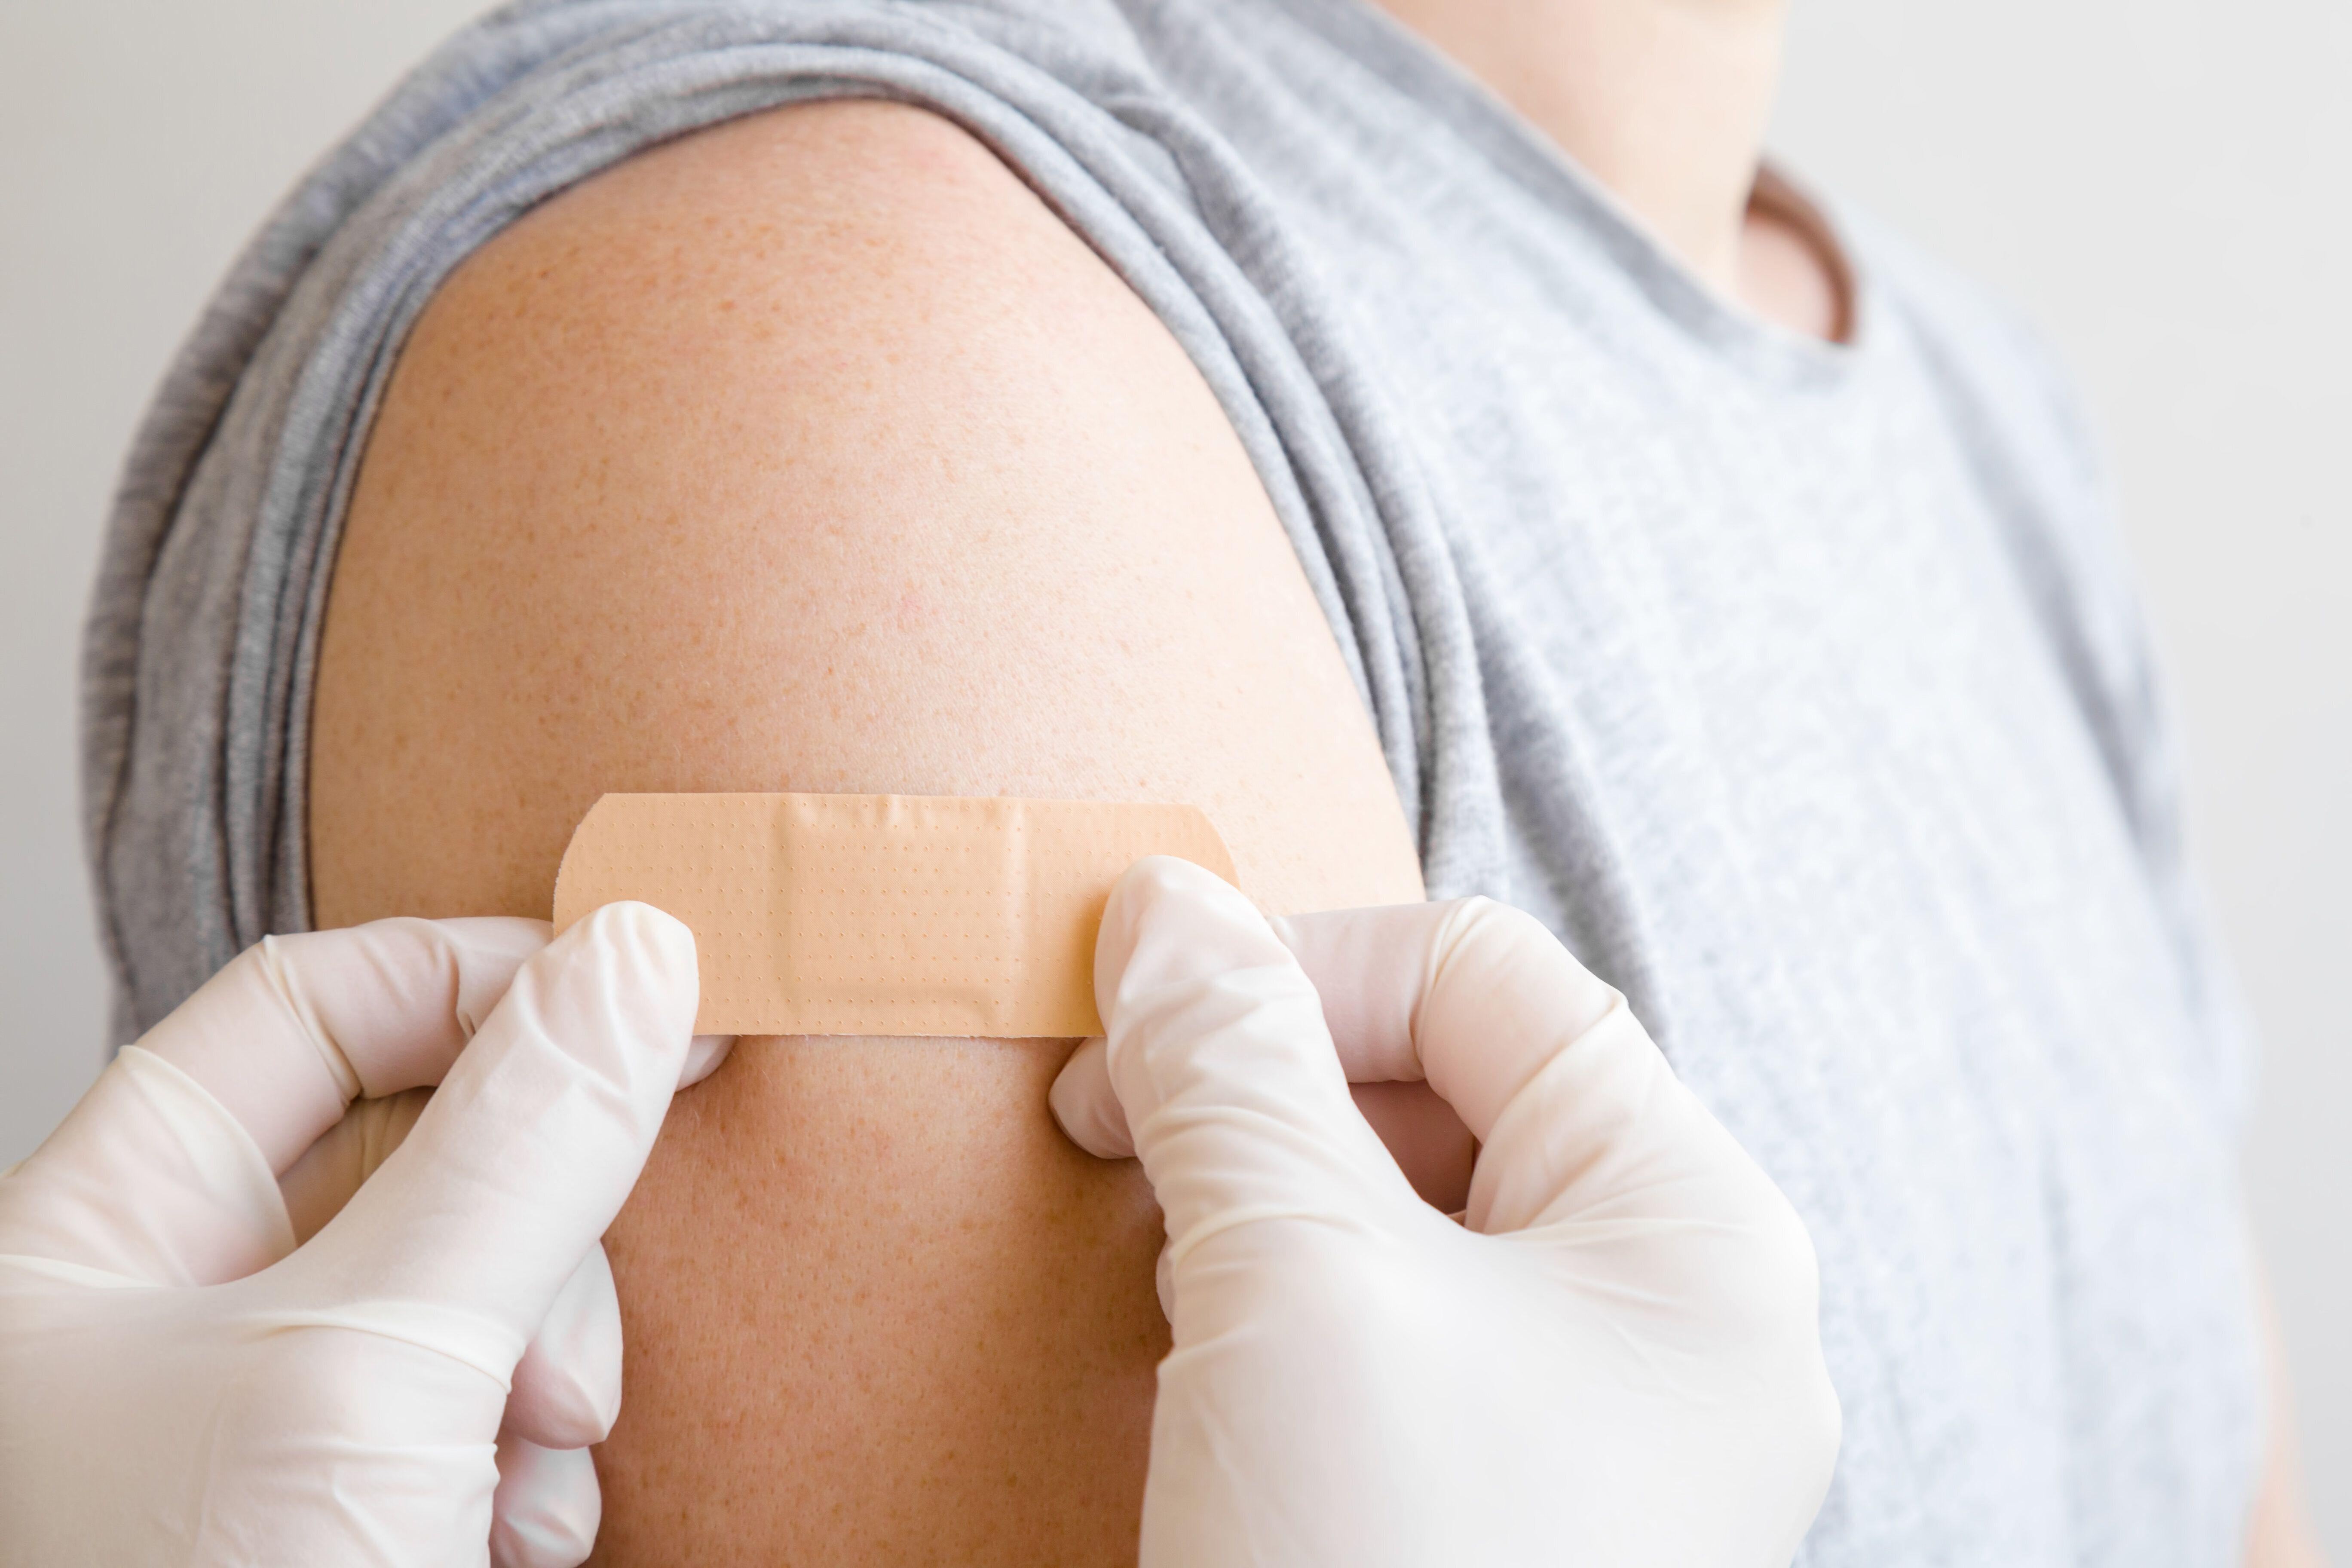 an image of a person getting vaccination for hpv men